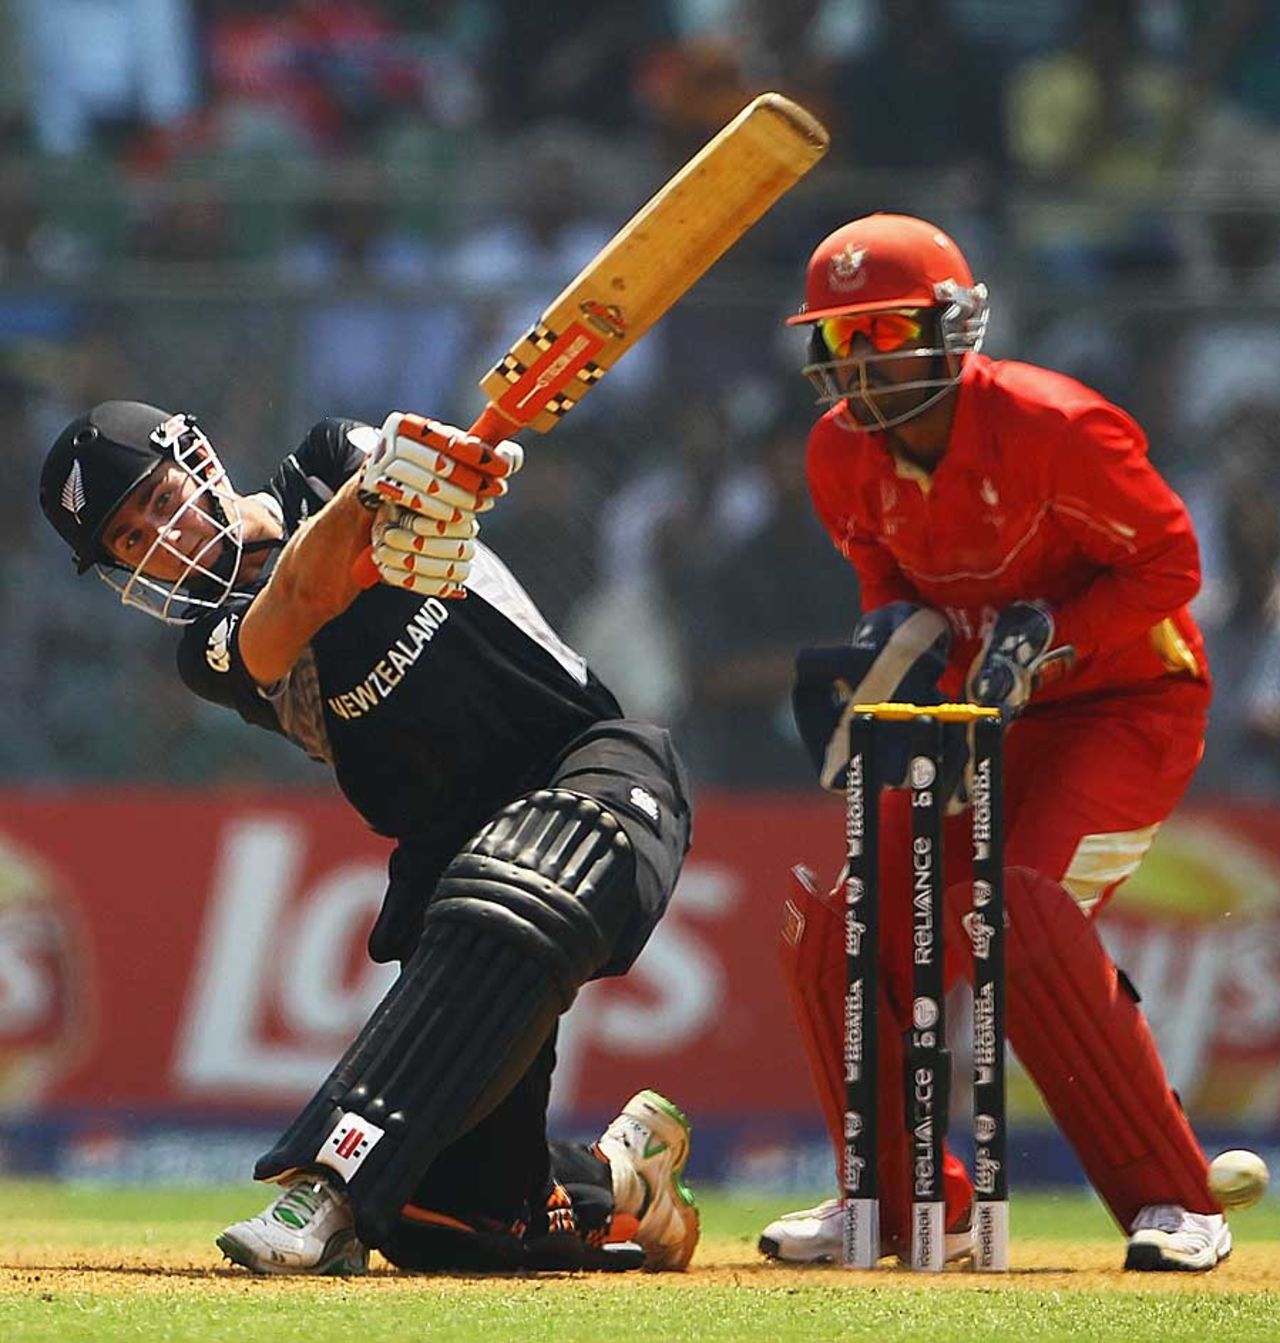 Kane Williamson slog-sweeps during his quick cameo, Canada v New Zealand, Group A, World Cup 2011, Mumbai, March 13, 2011